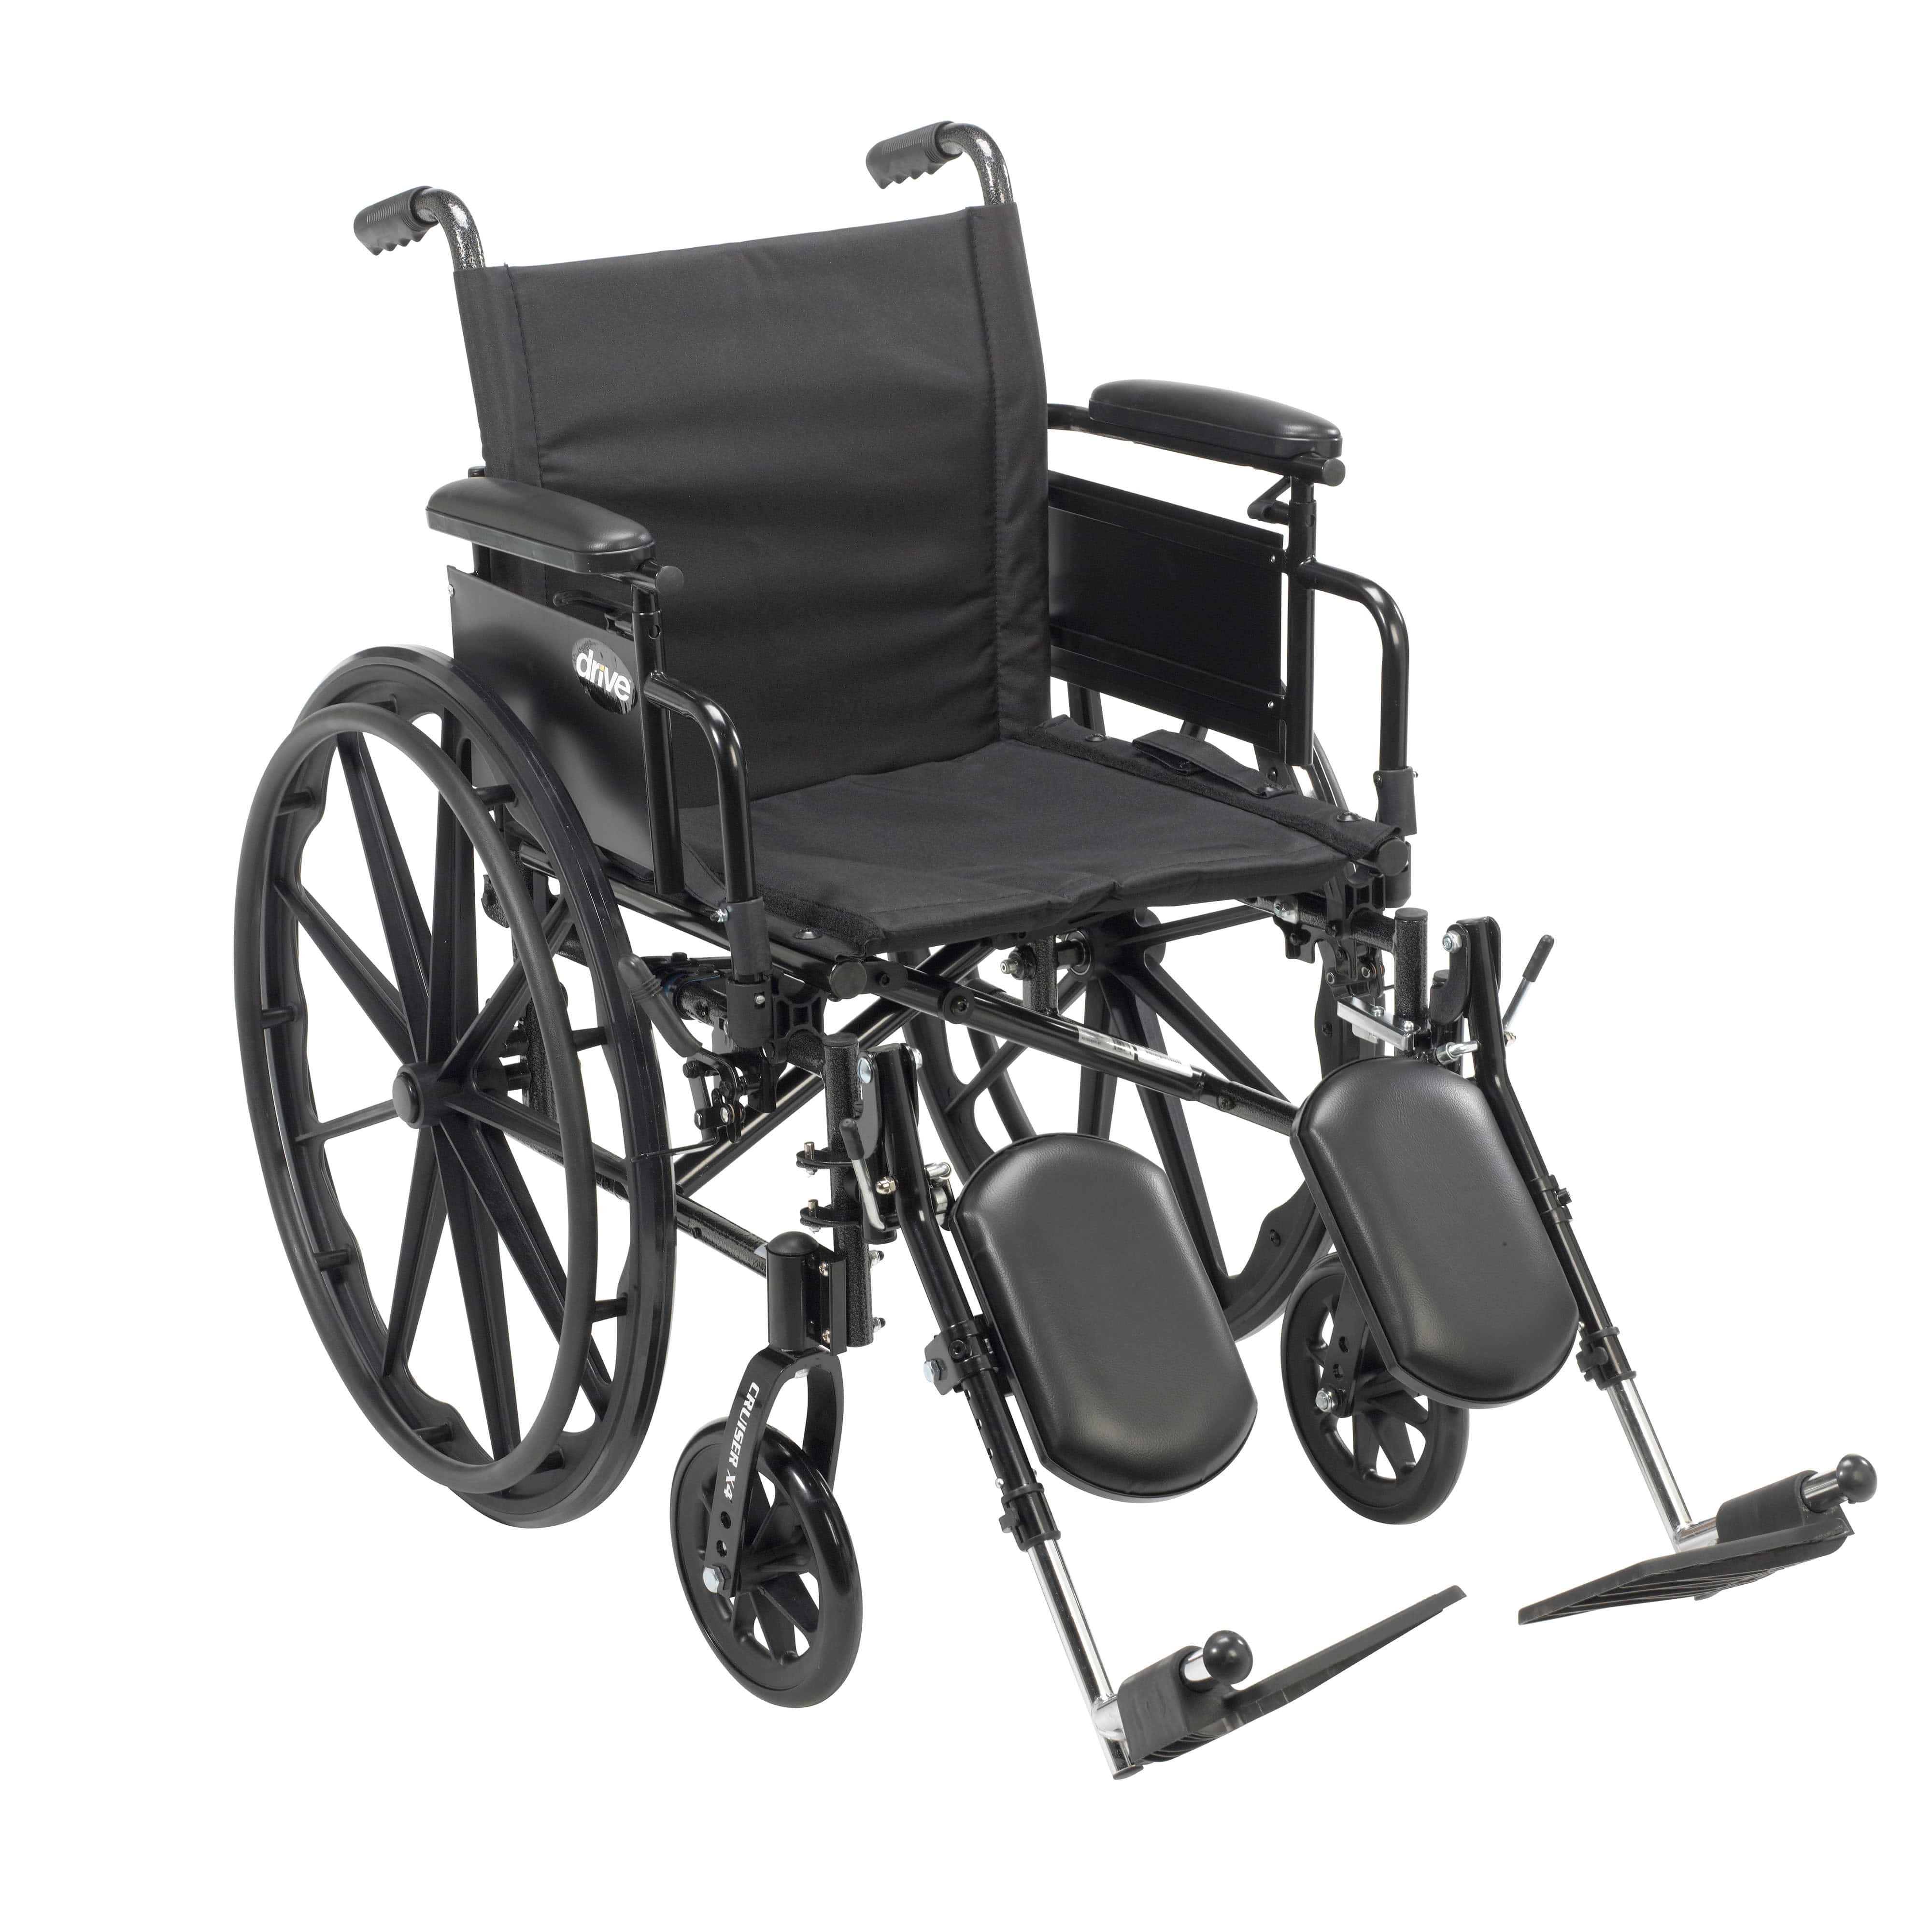 Drive Medical Wheelchairs/Lightweight Wheelchairs Desk Arms / Elevating Leg Rests / 16" Seat Drive Medical Cruiser X4 Lightweight Dual Axle Wheelchair with Adjustable Detatchable Arms